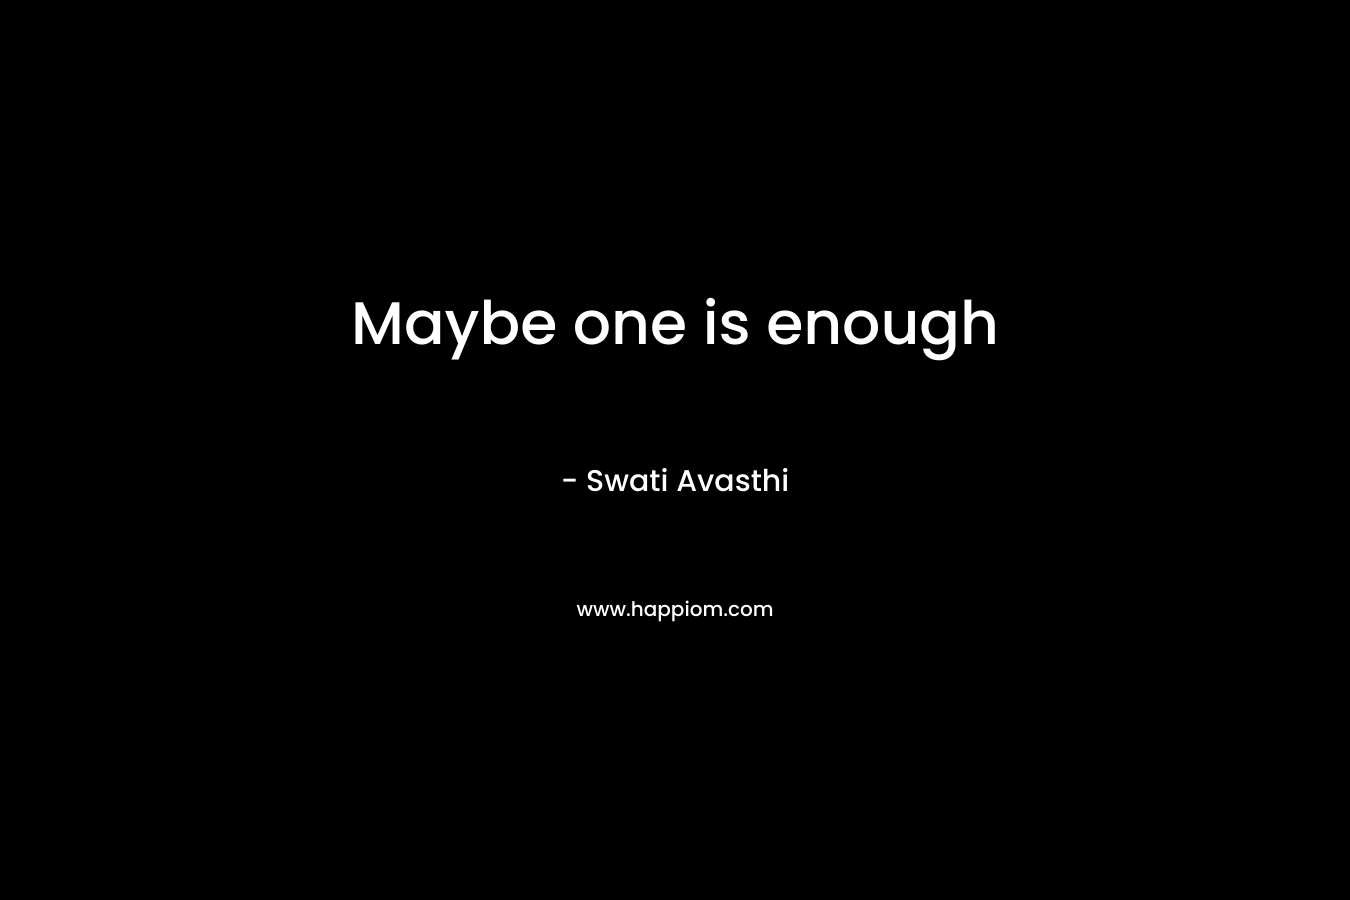 Maybe one is enough